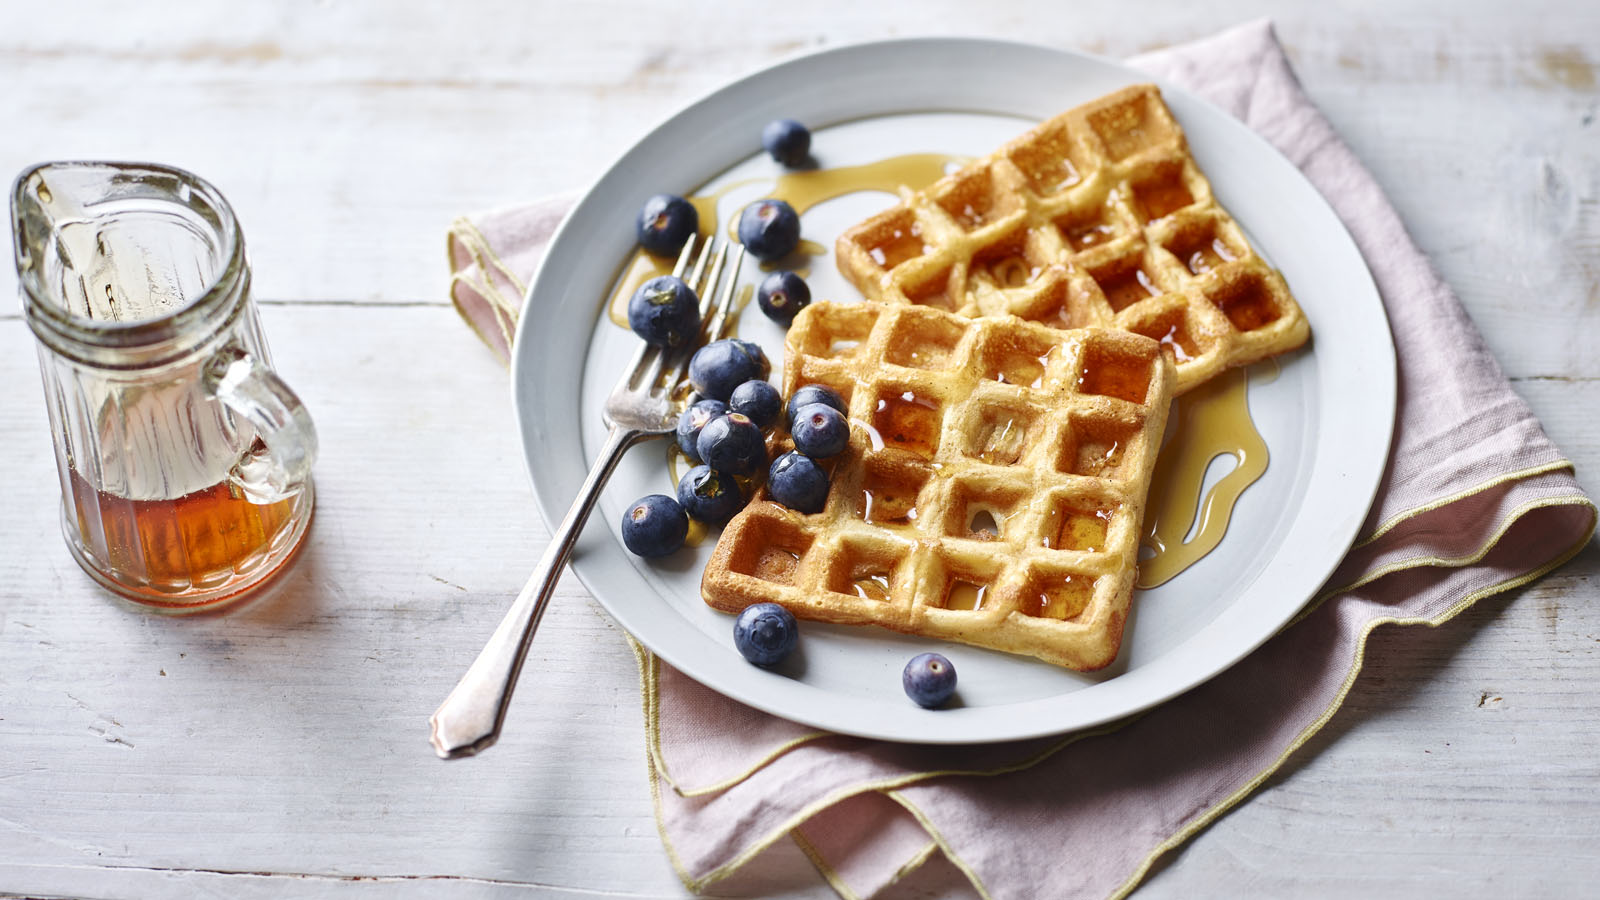 How to Make Perfect Waffles: The Best Makers and Belgian